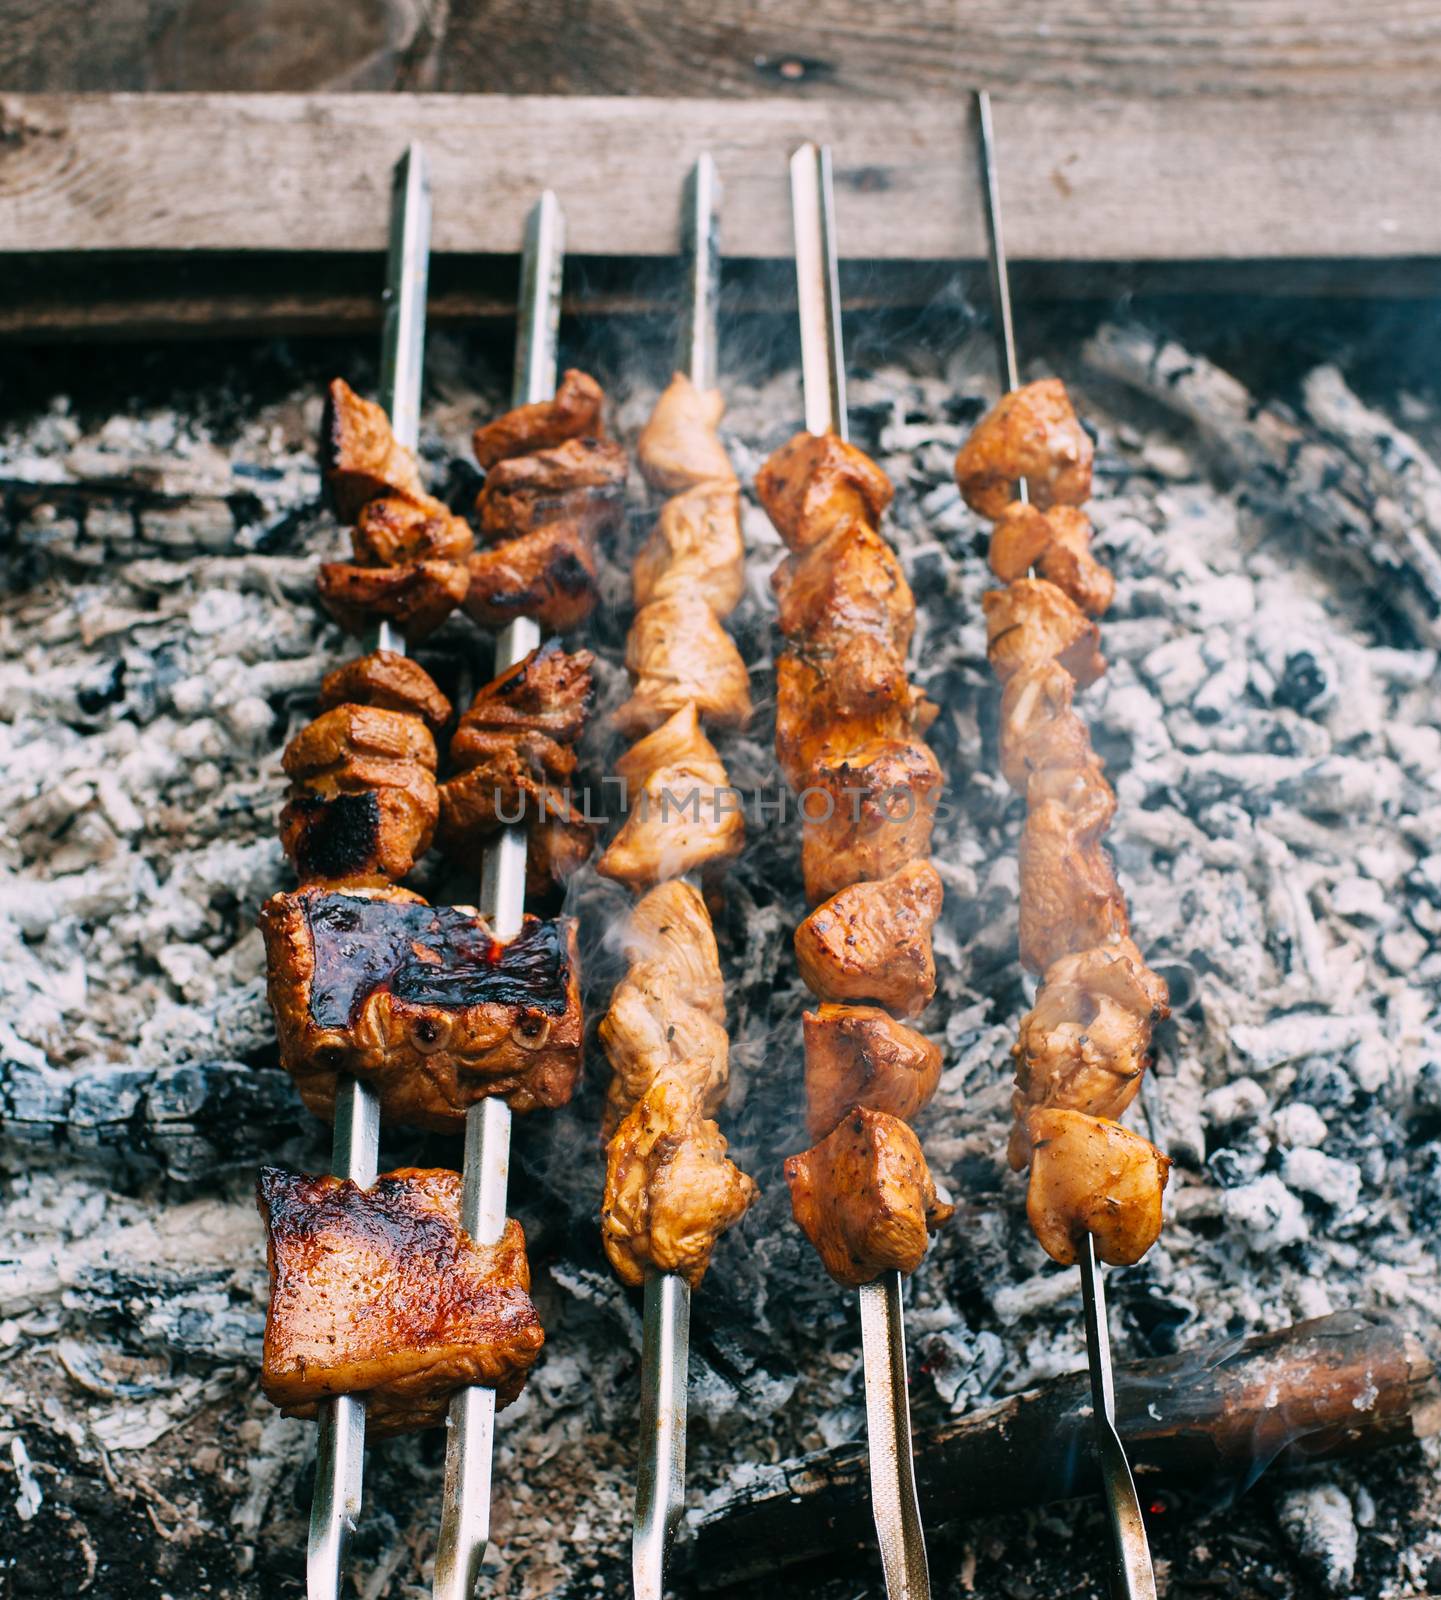 Chicken skewers on skewers on fire. Cooking meat outdoors in the open air.